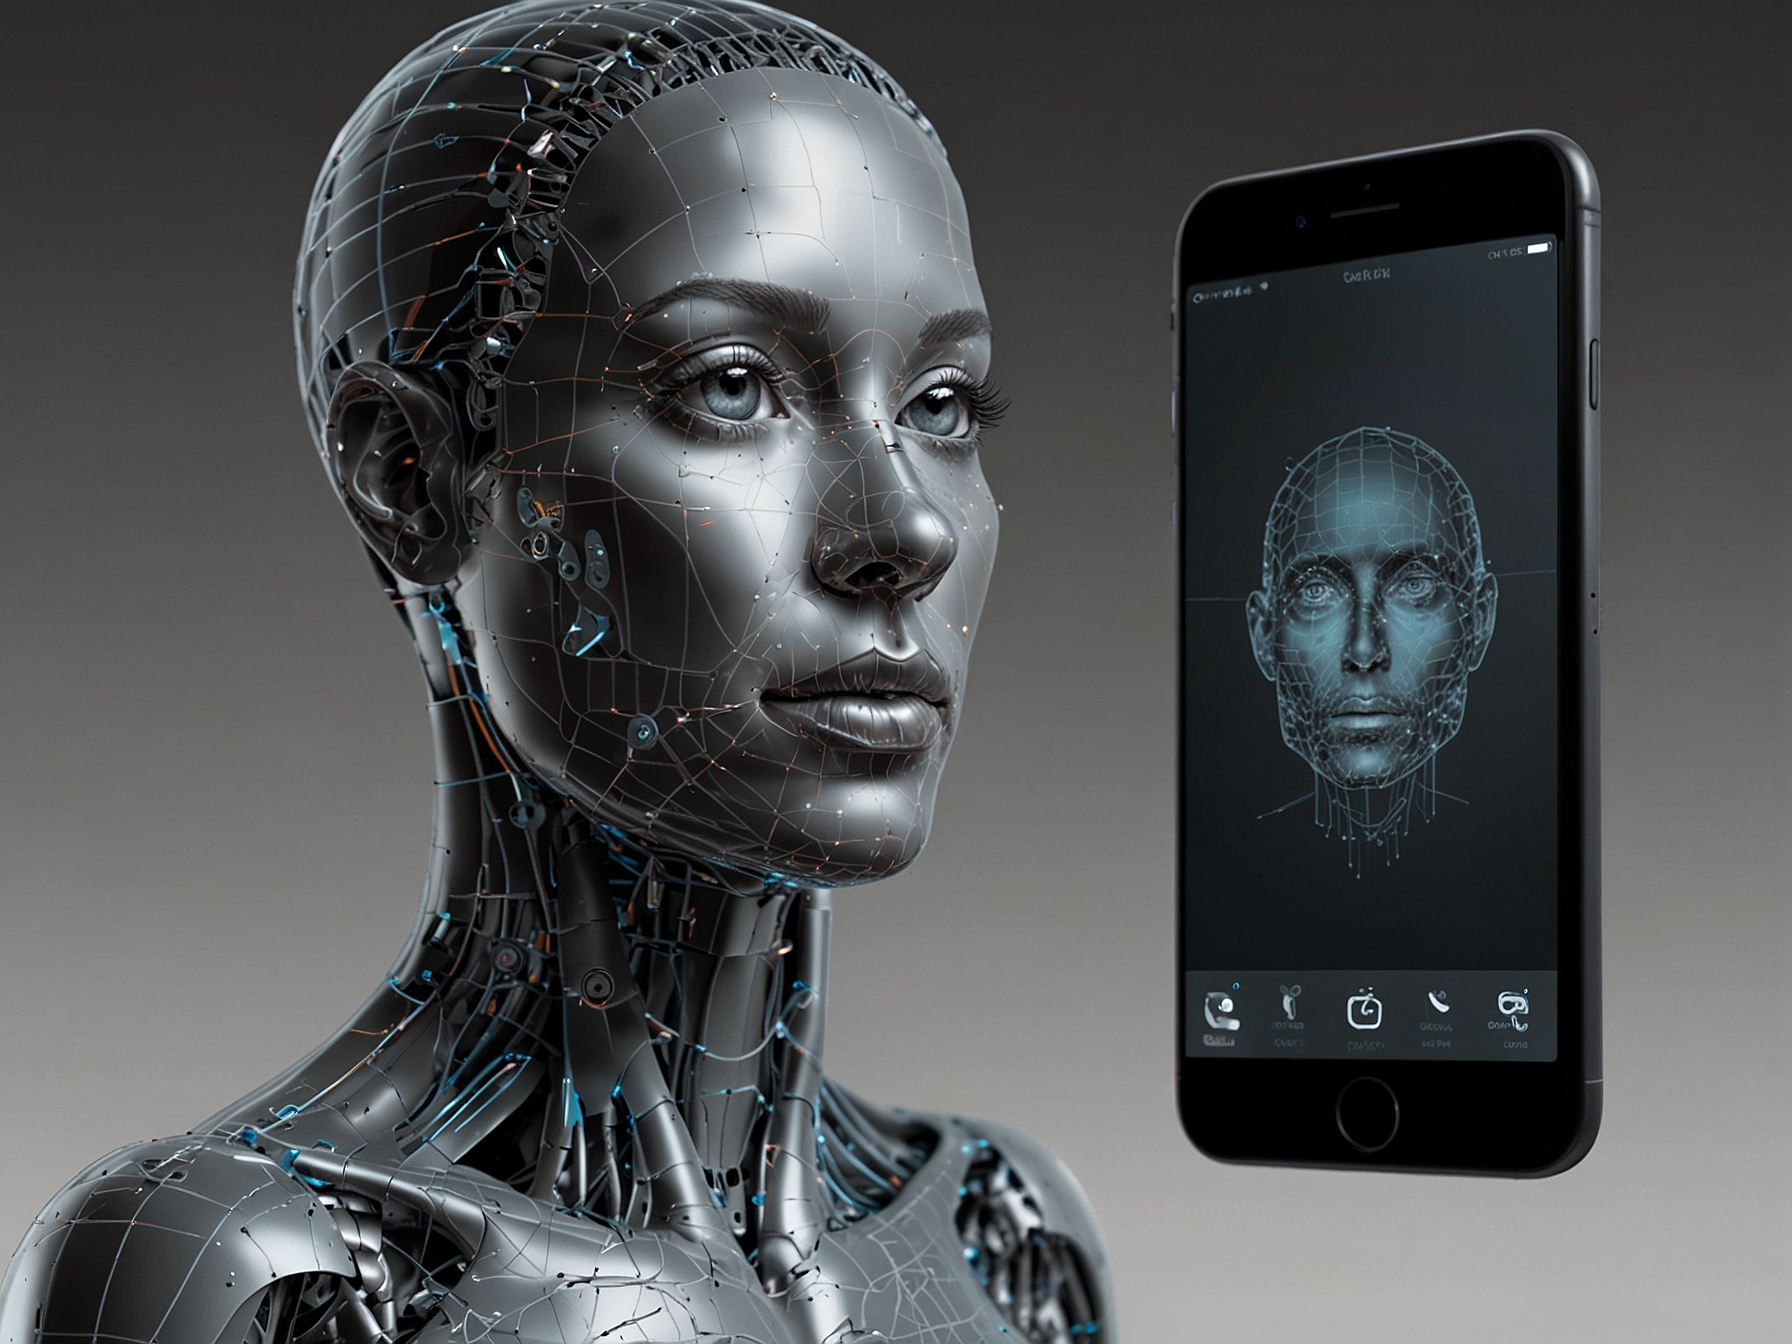 A conceptual image showing an iPhone with enhanced AI capabilities. Graphics illustrate Meta's generative AI model blending seamlessly with Apple's innovative AI system.